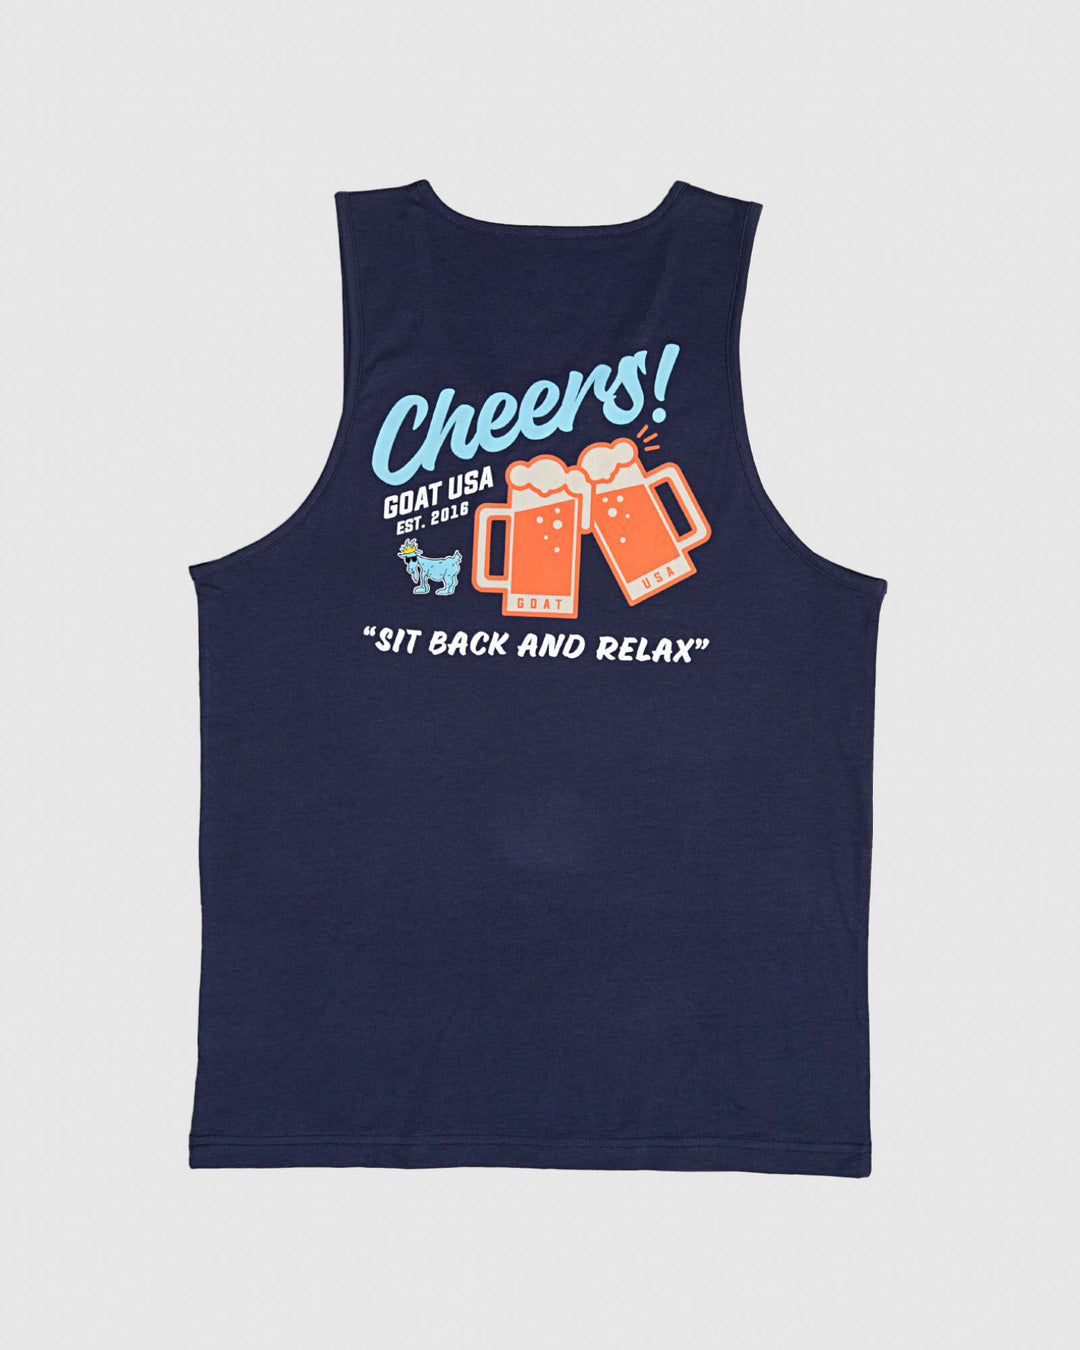 Navy tank top with two mugs toasting and text that reads "Cheers sit back and relax"